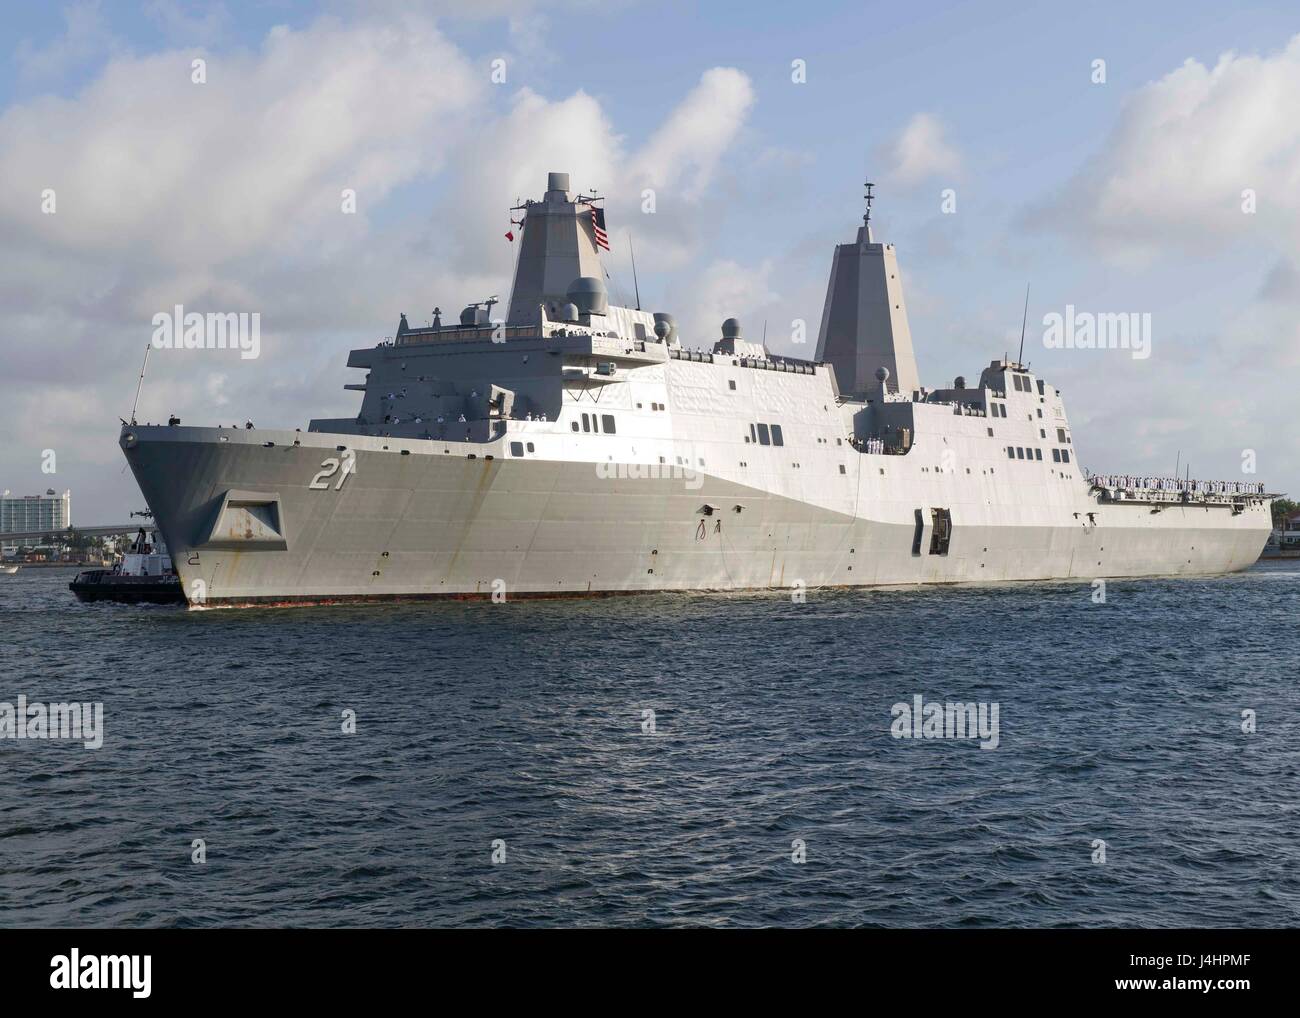 The USN San Antonio-class amphibious transport dock ship USS New York arrives at the Port Everglades Cruise Port May 1, 2017 in Fort Lauderdale, Florida.     (photo by Bill Dodge/US Navy  via Planetpix) Stock Photo